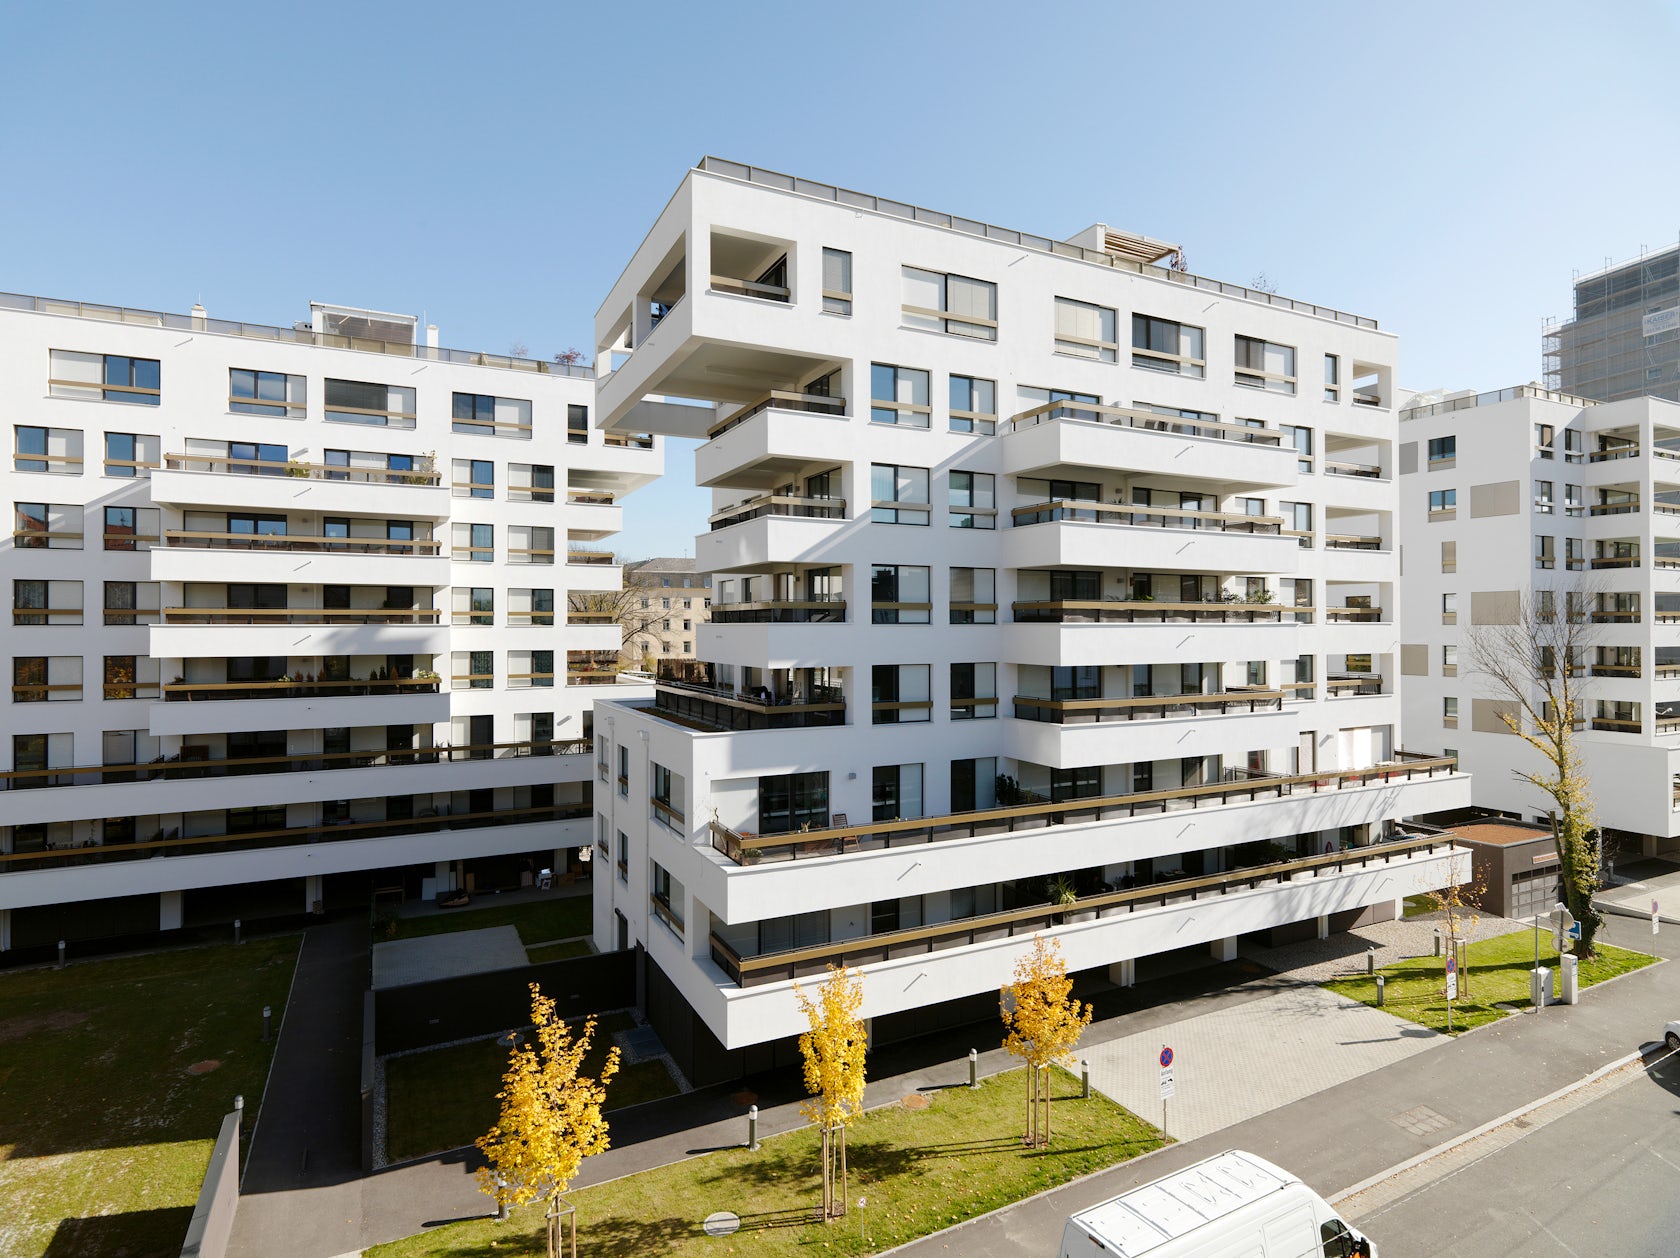 Apartment Houses Laimburggasse by Gangoly & Kristiner Architects